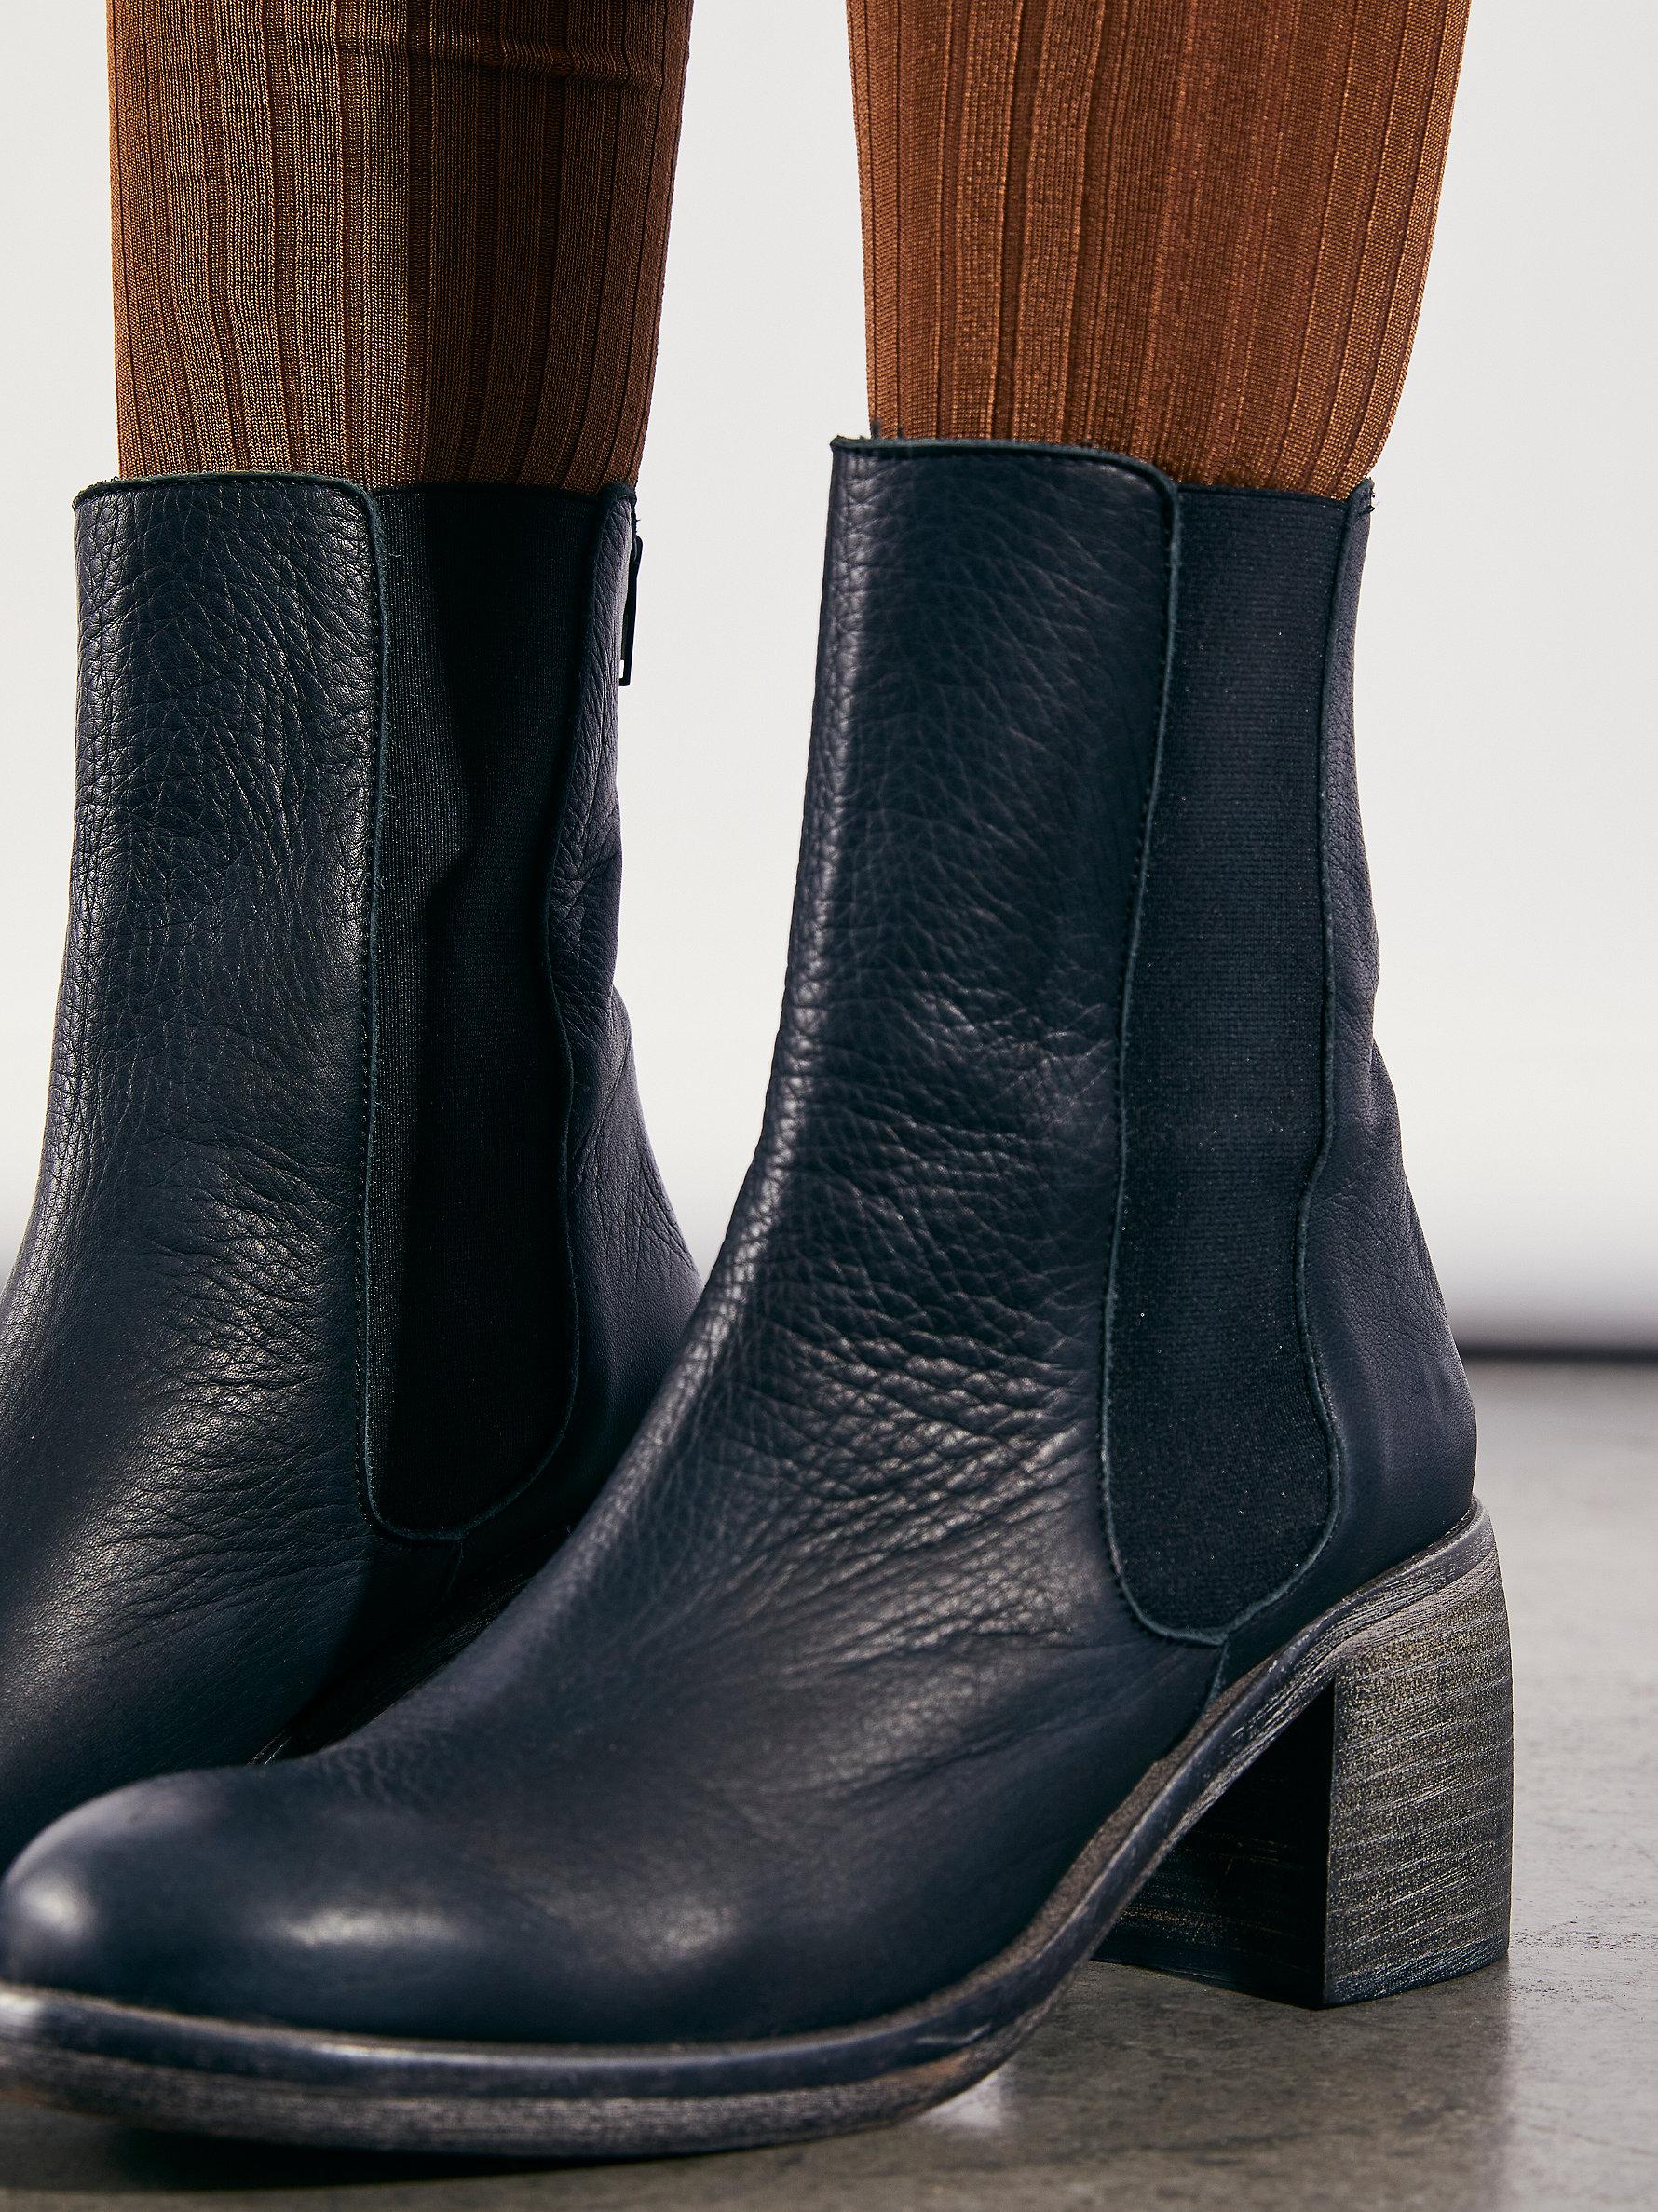 Free People Essential Chelsea Boots in Black | Lyst